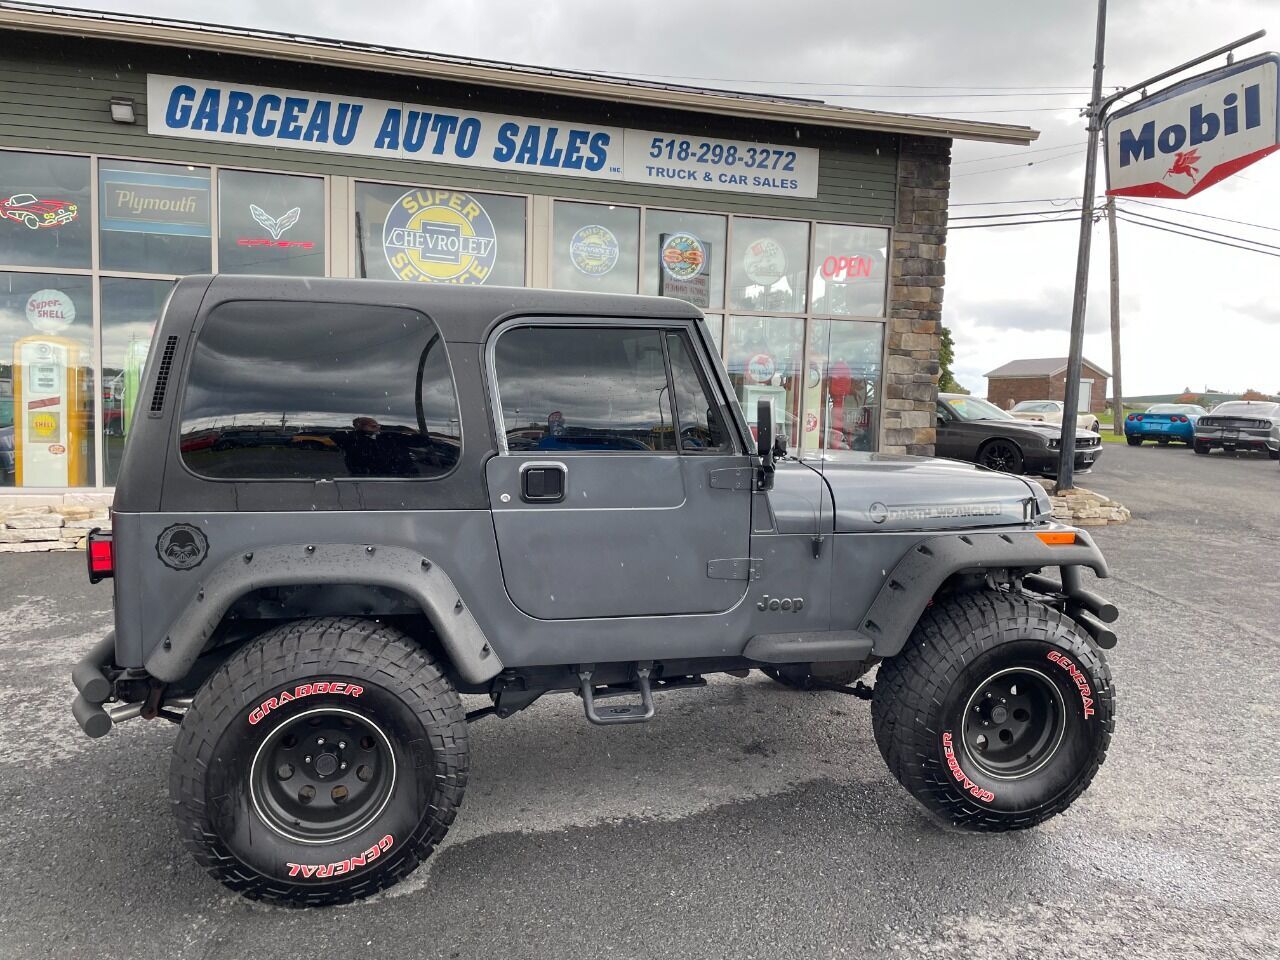 1990 Jeep Wrangler For Sale In Seattle, WA ®